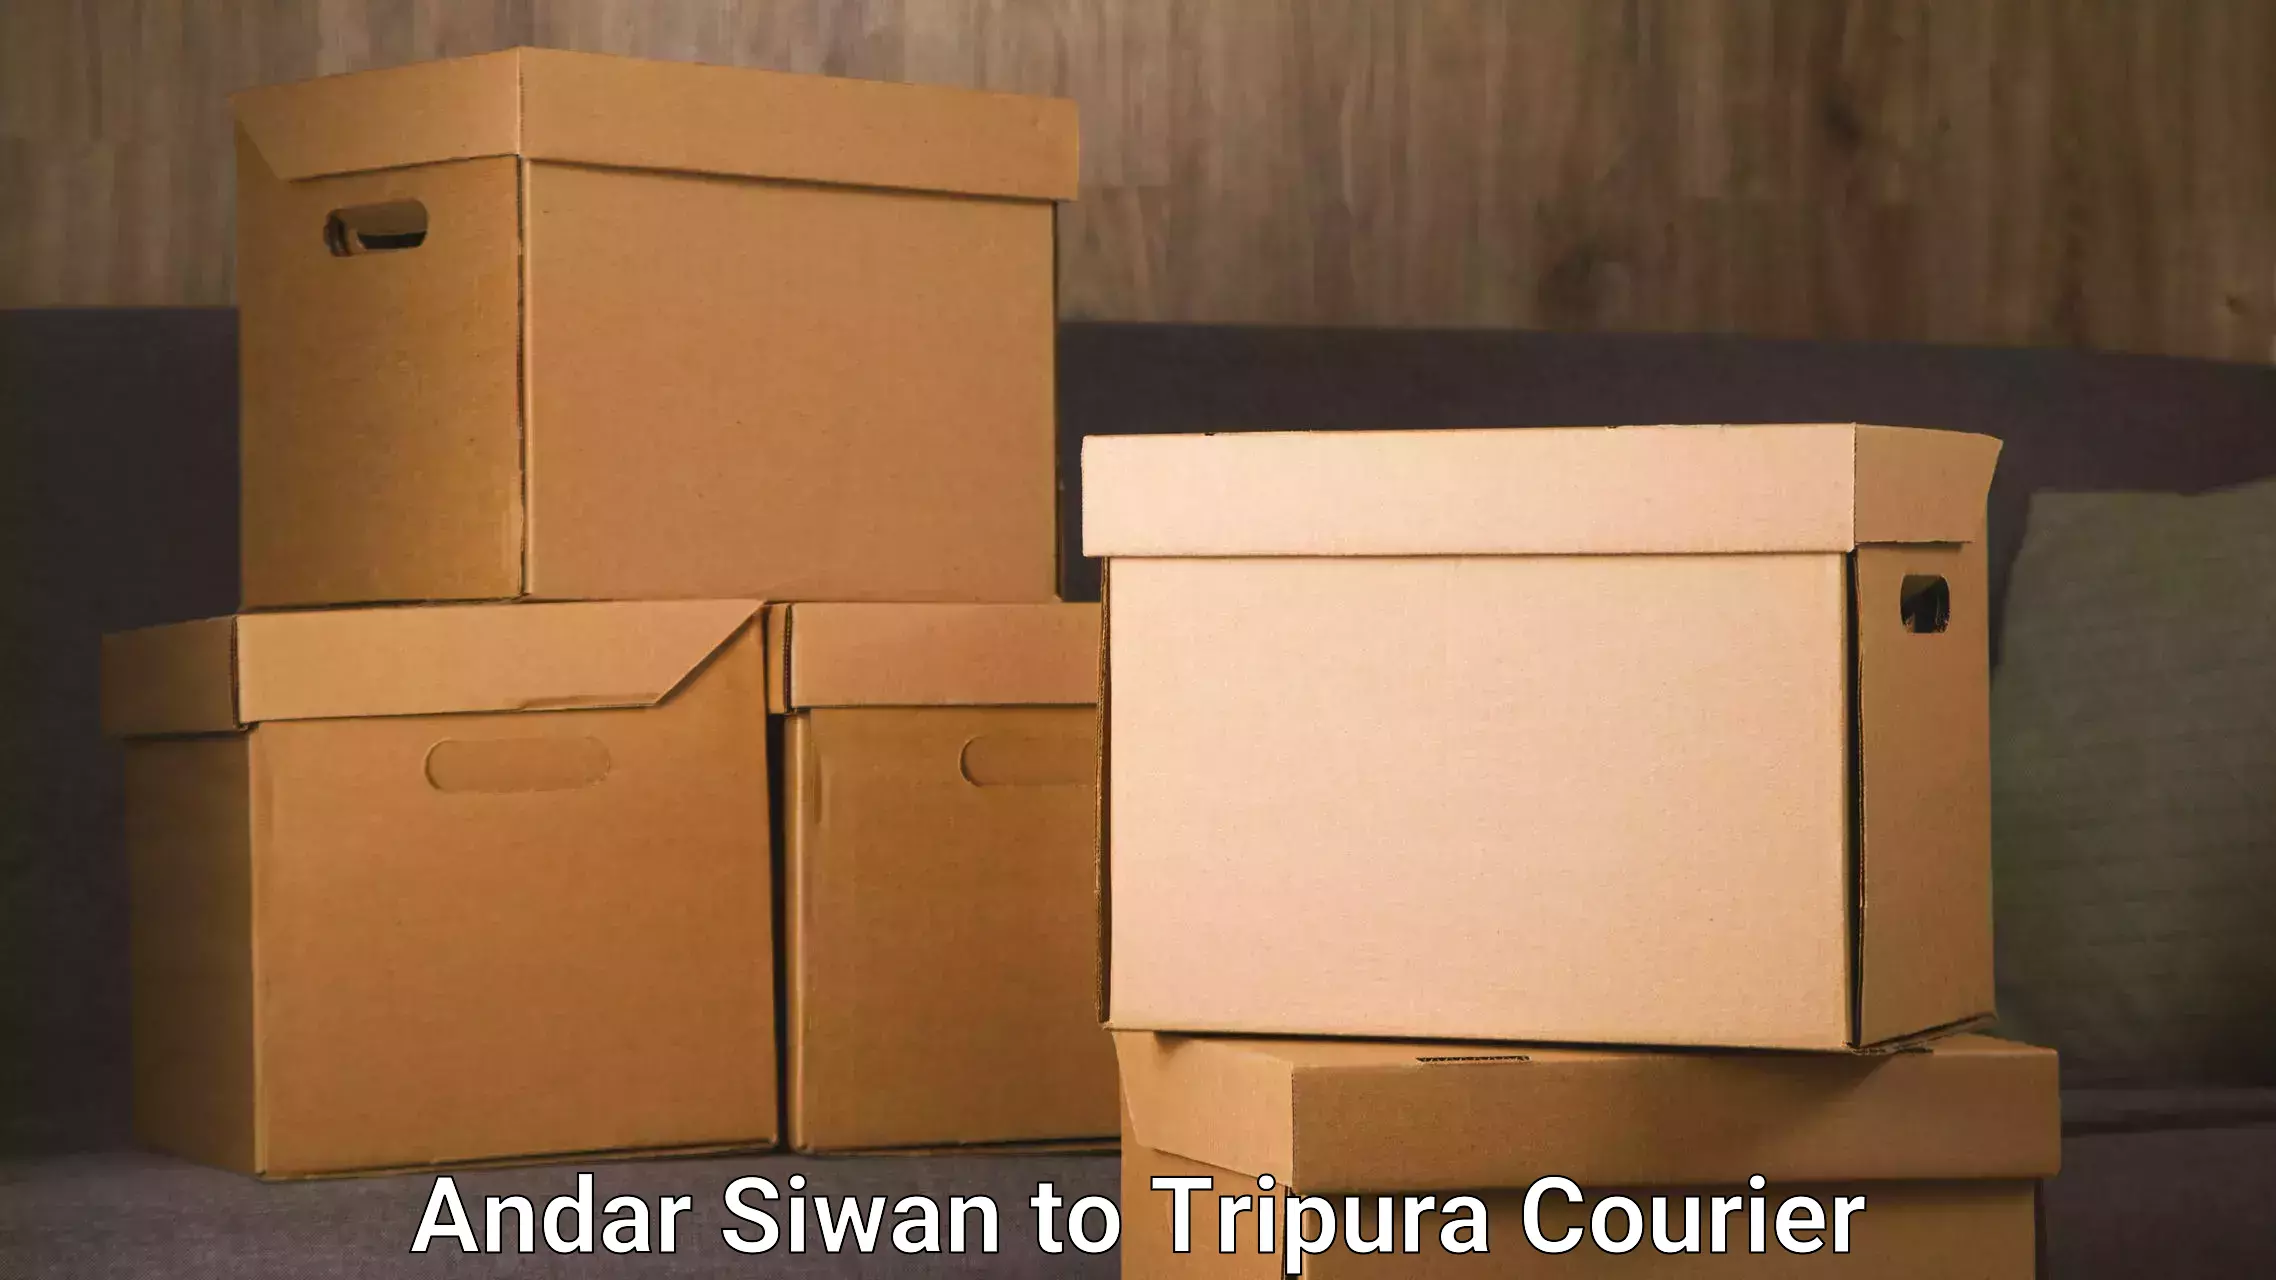 Efficient moving company Andar Siwan to Tripura